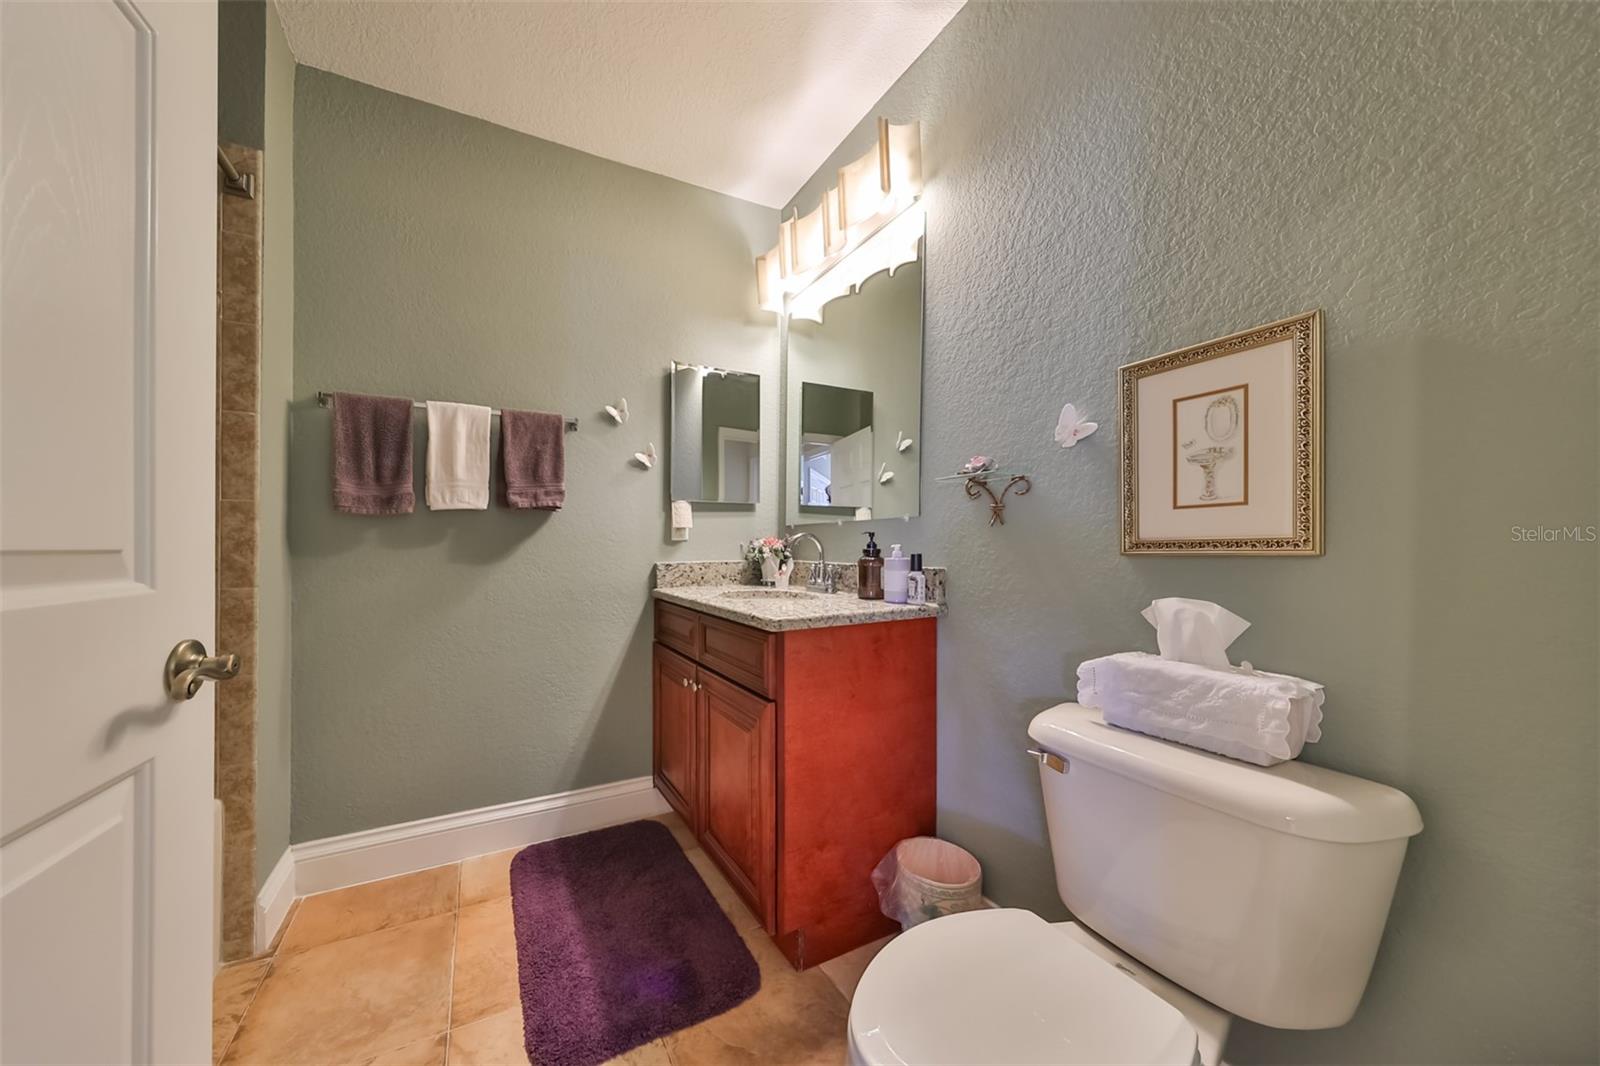 Guest bathroom is sparkling clean with very tasteful contemporary fixtures and neutral paint tones. Notice the custom light fixture for added beauty.